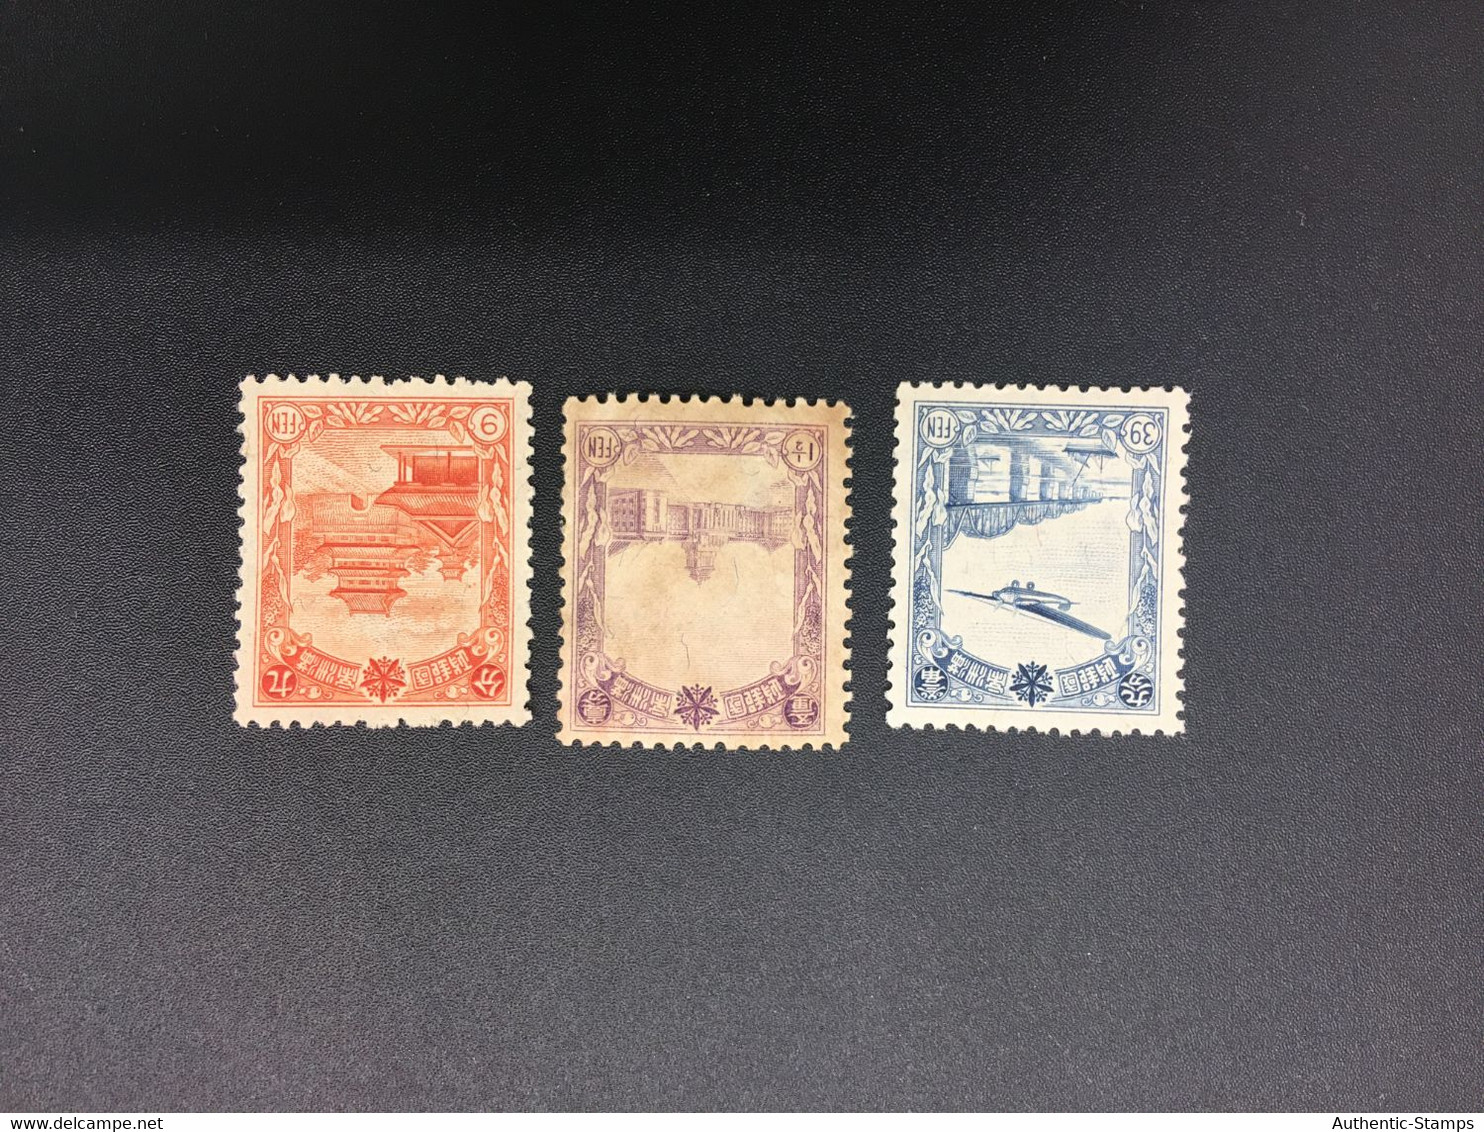 CHINA STAMP,  TIMBRO, STEMPEL,  CINA, CHINE, LIST 8567 - 1932-45 Mandchourie (Mandchoukouo)